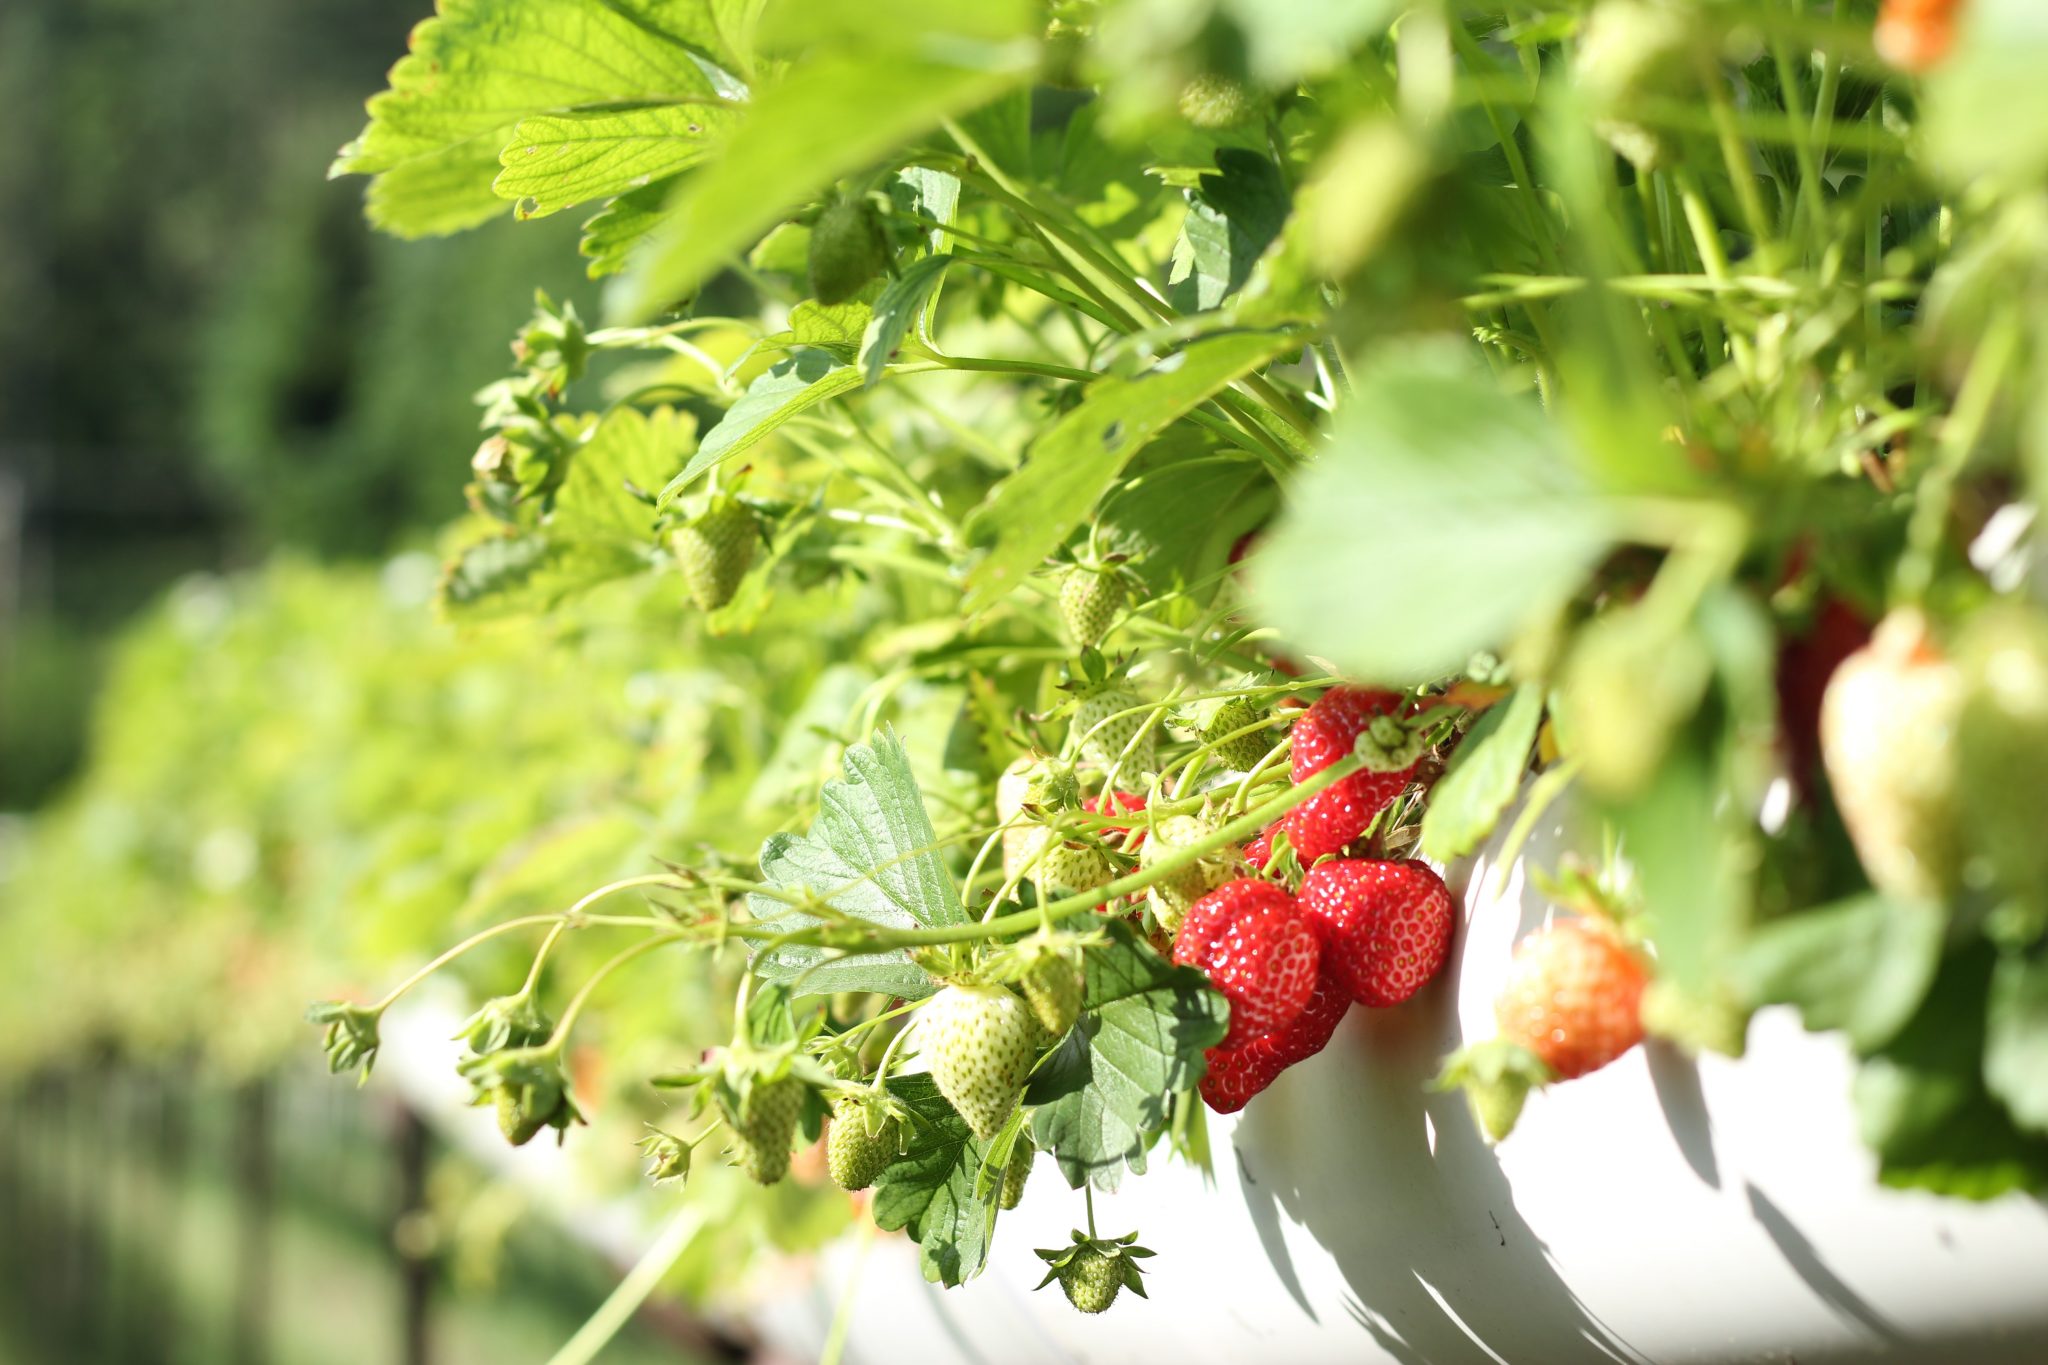 ‘Paddock to Punnet’ – Enjoy the last month of Strawberry picking season at Surf Coast Strawberry Fields!